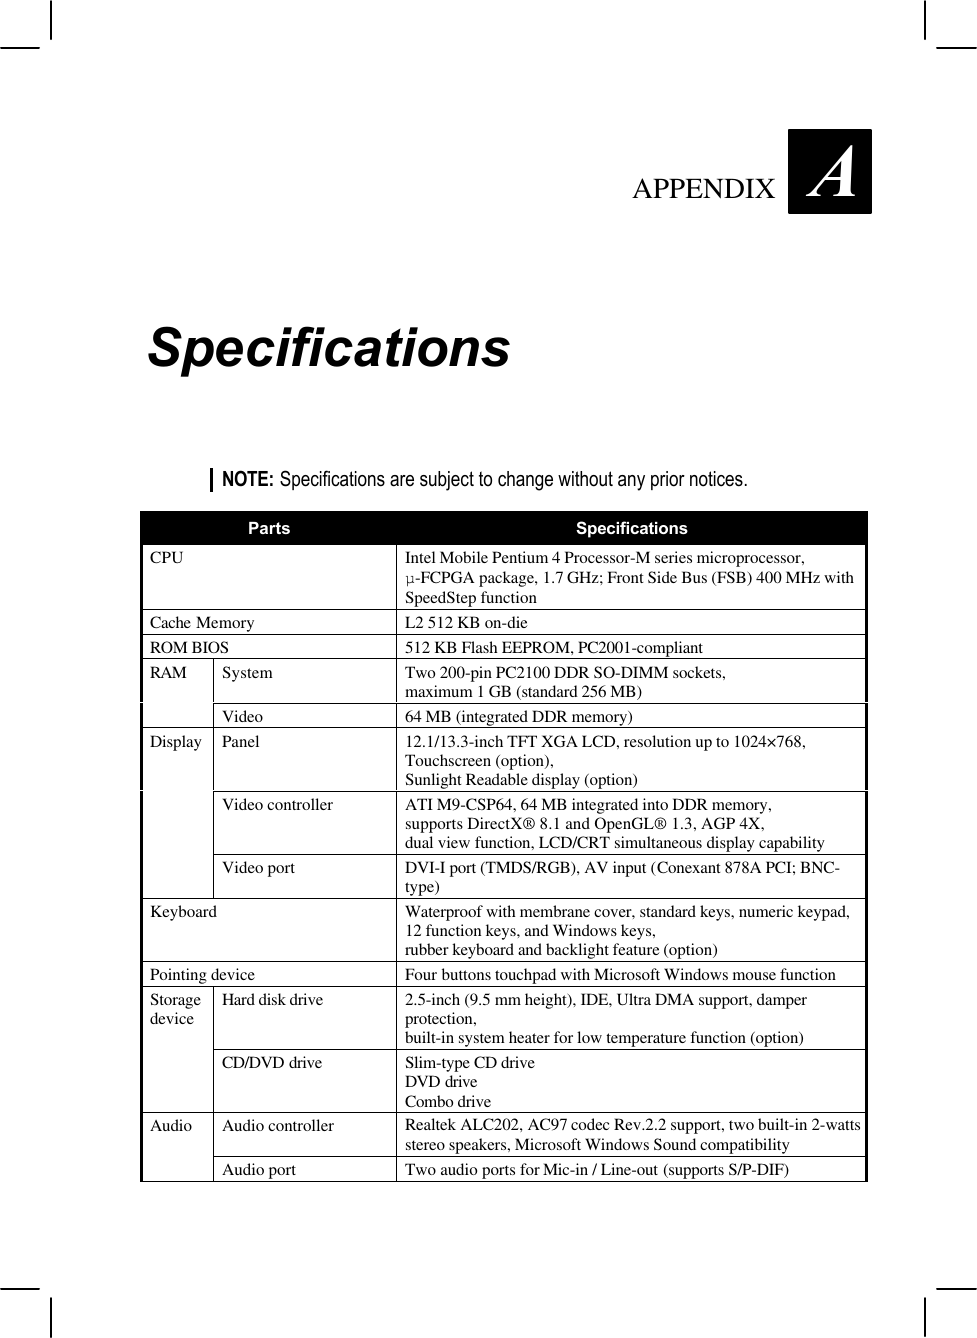 APPENDIX  ASpecificationsNOTE: Specifications are subject to change without any prior notices.Parts SpecificationsCPU Intel Mobile Pentium 4 Processor-M series microprocessor,µ-FCPGA package, 1.7 GHz; Front Side Bus (FSB) 400 MHz withSpeedStep functionCache Memory L2 512 KB on-dieROM BIOS 512 KB Flash EEPROM, PC2001-compliantSystem Two 200-pin PC2100 DDR SO-DIMM sockets,maximum 1 GB (standard 256 MB)RAMVideo 64 MB (integrated DDR memory)Panel 12.1/13.3-inch TFT XGA LCD, resolution up to 1024×768,Touchscreen (option),Sunlight Readable display (option)Video controller ATI M9-CSP64, 64 MB integrated into DDR memory,supports DirectX® 8.1 and OpenGL® 1.3, AGP 4X,dual view function, LCD/CRT simultaneous display capabilityDisplayVideo port DVI-I port (TMDS/RGB), AV input (Conexant 878A PCI; BNC-type)Keyboard Waterproof with membrane cover, standard keys, numeric keypad,12 function keys, and Windows keys,rubber keyboard and backlight feature (option)Pointing device Four buttons touchpad with Microsoft Windows mouse functionHard disk drive 2.5-inch (9.5 mm height), IDE, Ultra DMA support, damperprotection,built-in system heater for low temperature function (option)StoragedeviceCD/DVD drive Slim-type CD driveDVD driveCombo driveAudio controller Realtek ALC202, AC97 codec Rev.2.2 support, two built-in 2-wattsstereo speakers, Microsoft Windows Sound compatibilityAudioAudio port Two audio ports for Mic-in / Line-out (supports S/P-DIF)